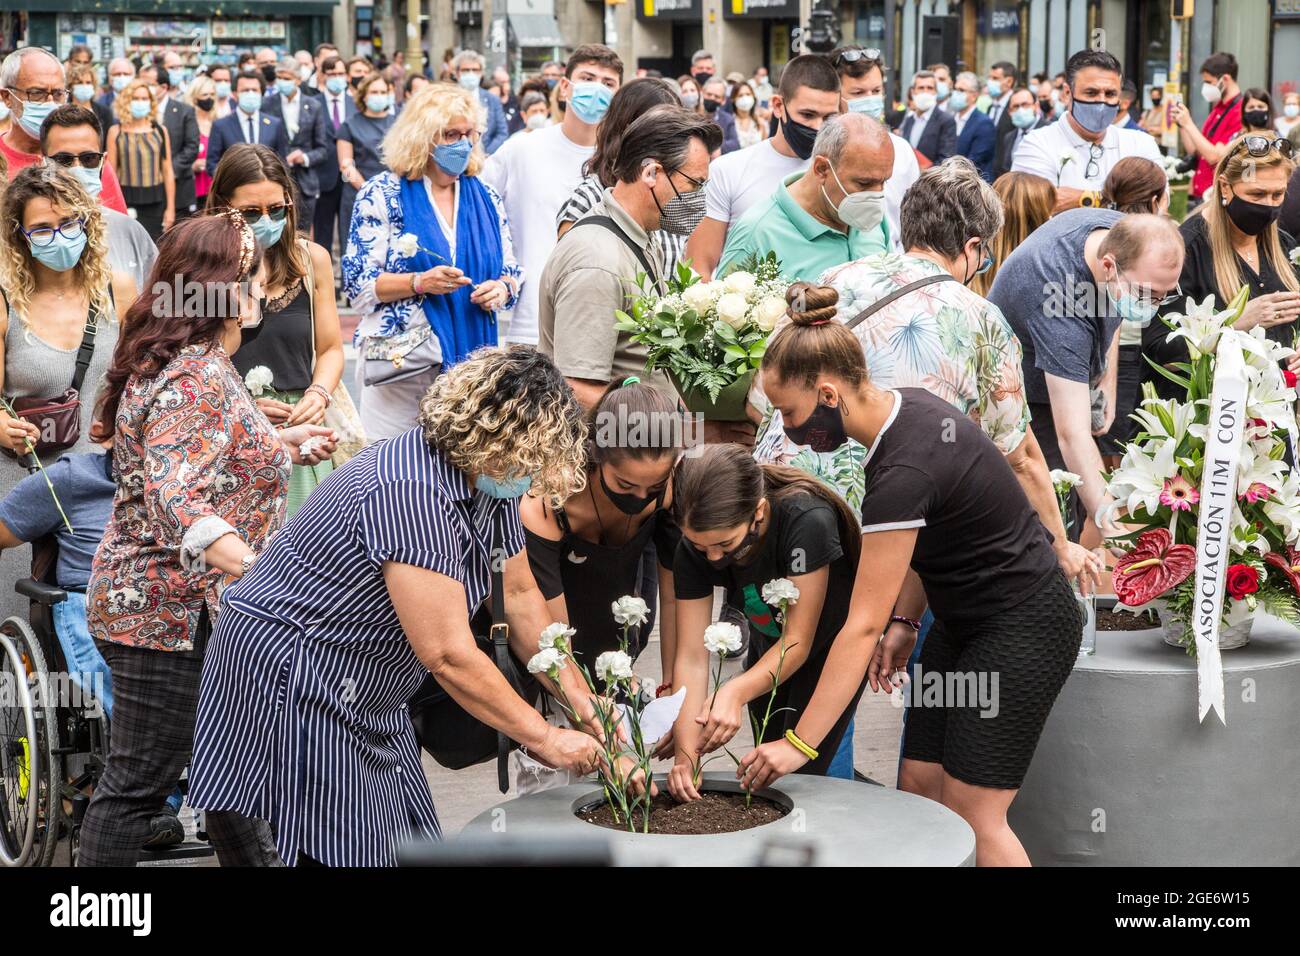 Barcelona, Catalonia, Spain. 17th Aug, 2021. Families of the victims of the jihadist attack on La Rambla are seen laying flowers at the anniversary ceremony of the attack.Barcelona pays tribute to the victims on the fourth anniversary of the jihadist attack on La Rambla where on August 17, 2017, a van carried out the massive outrage, which caused the death of 15 people.The families of the victims have been the protagonists of the ceremony, depositing white carnations and bouquets of flowers in three cylinders. This was followed by the authorities, with the mayor of Barcelona, Ada Colau, the Stock Photo